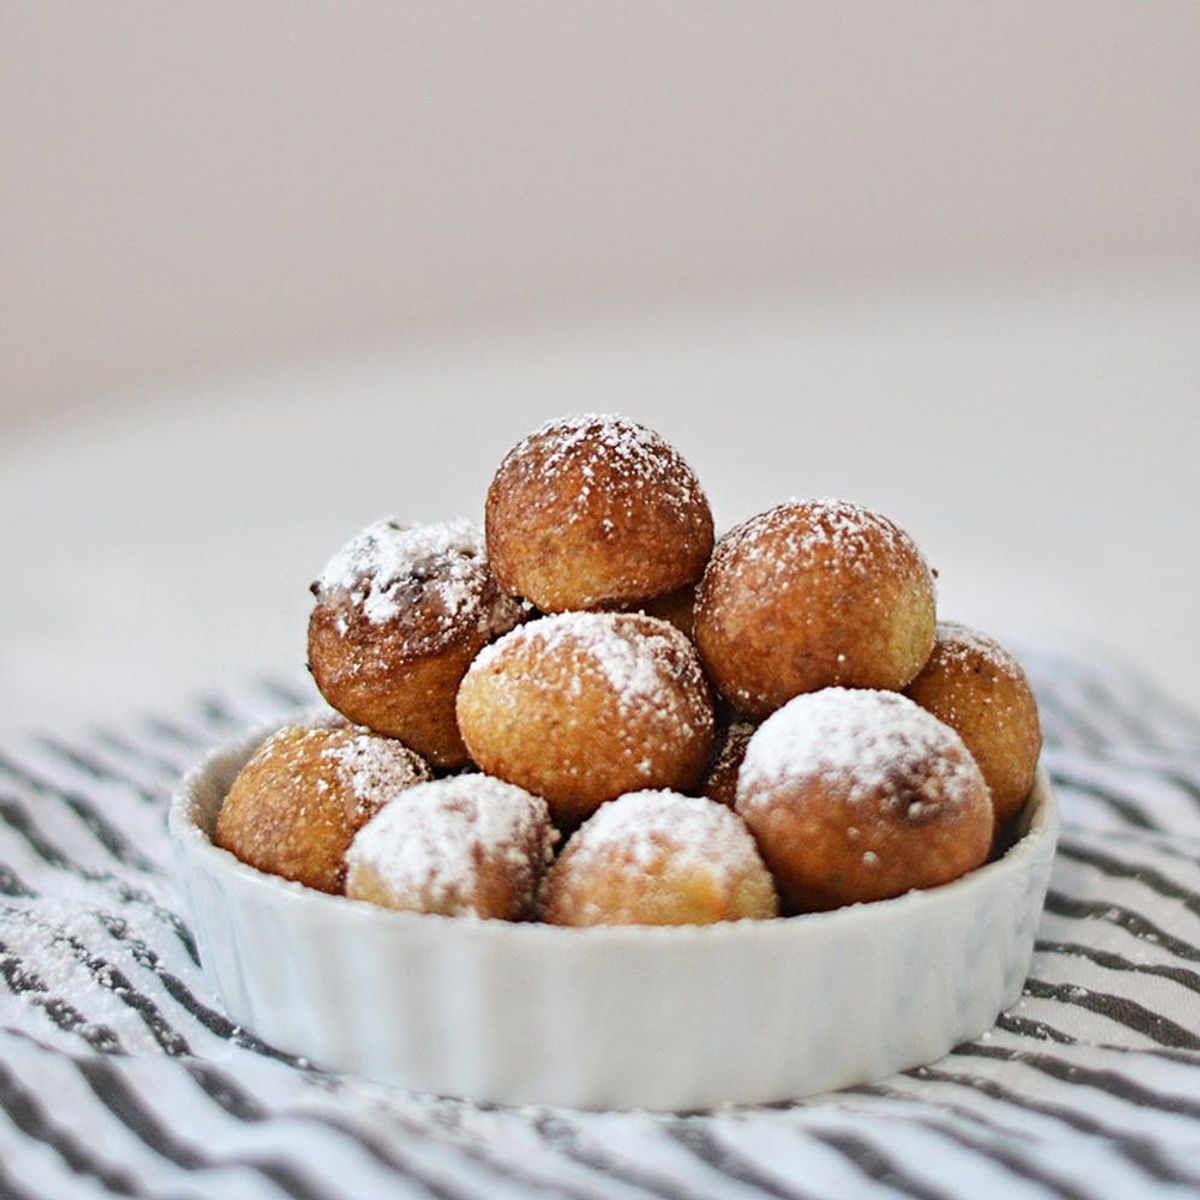 These Deep Fried Cookie Dough Bites Are the Bite-Sized Snack You Need